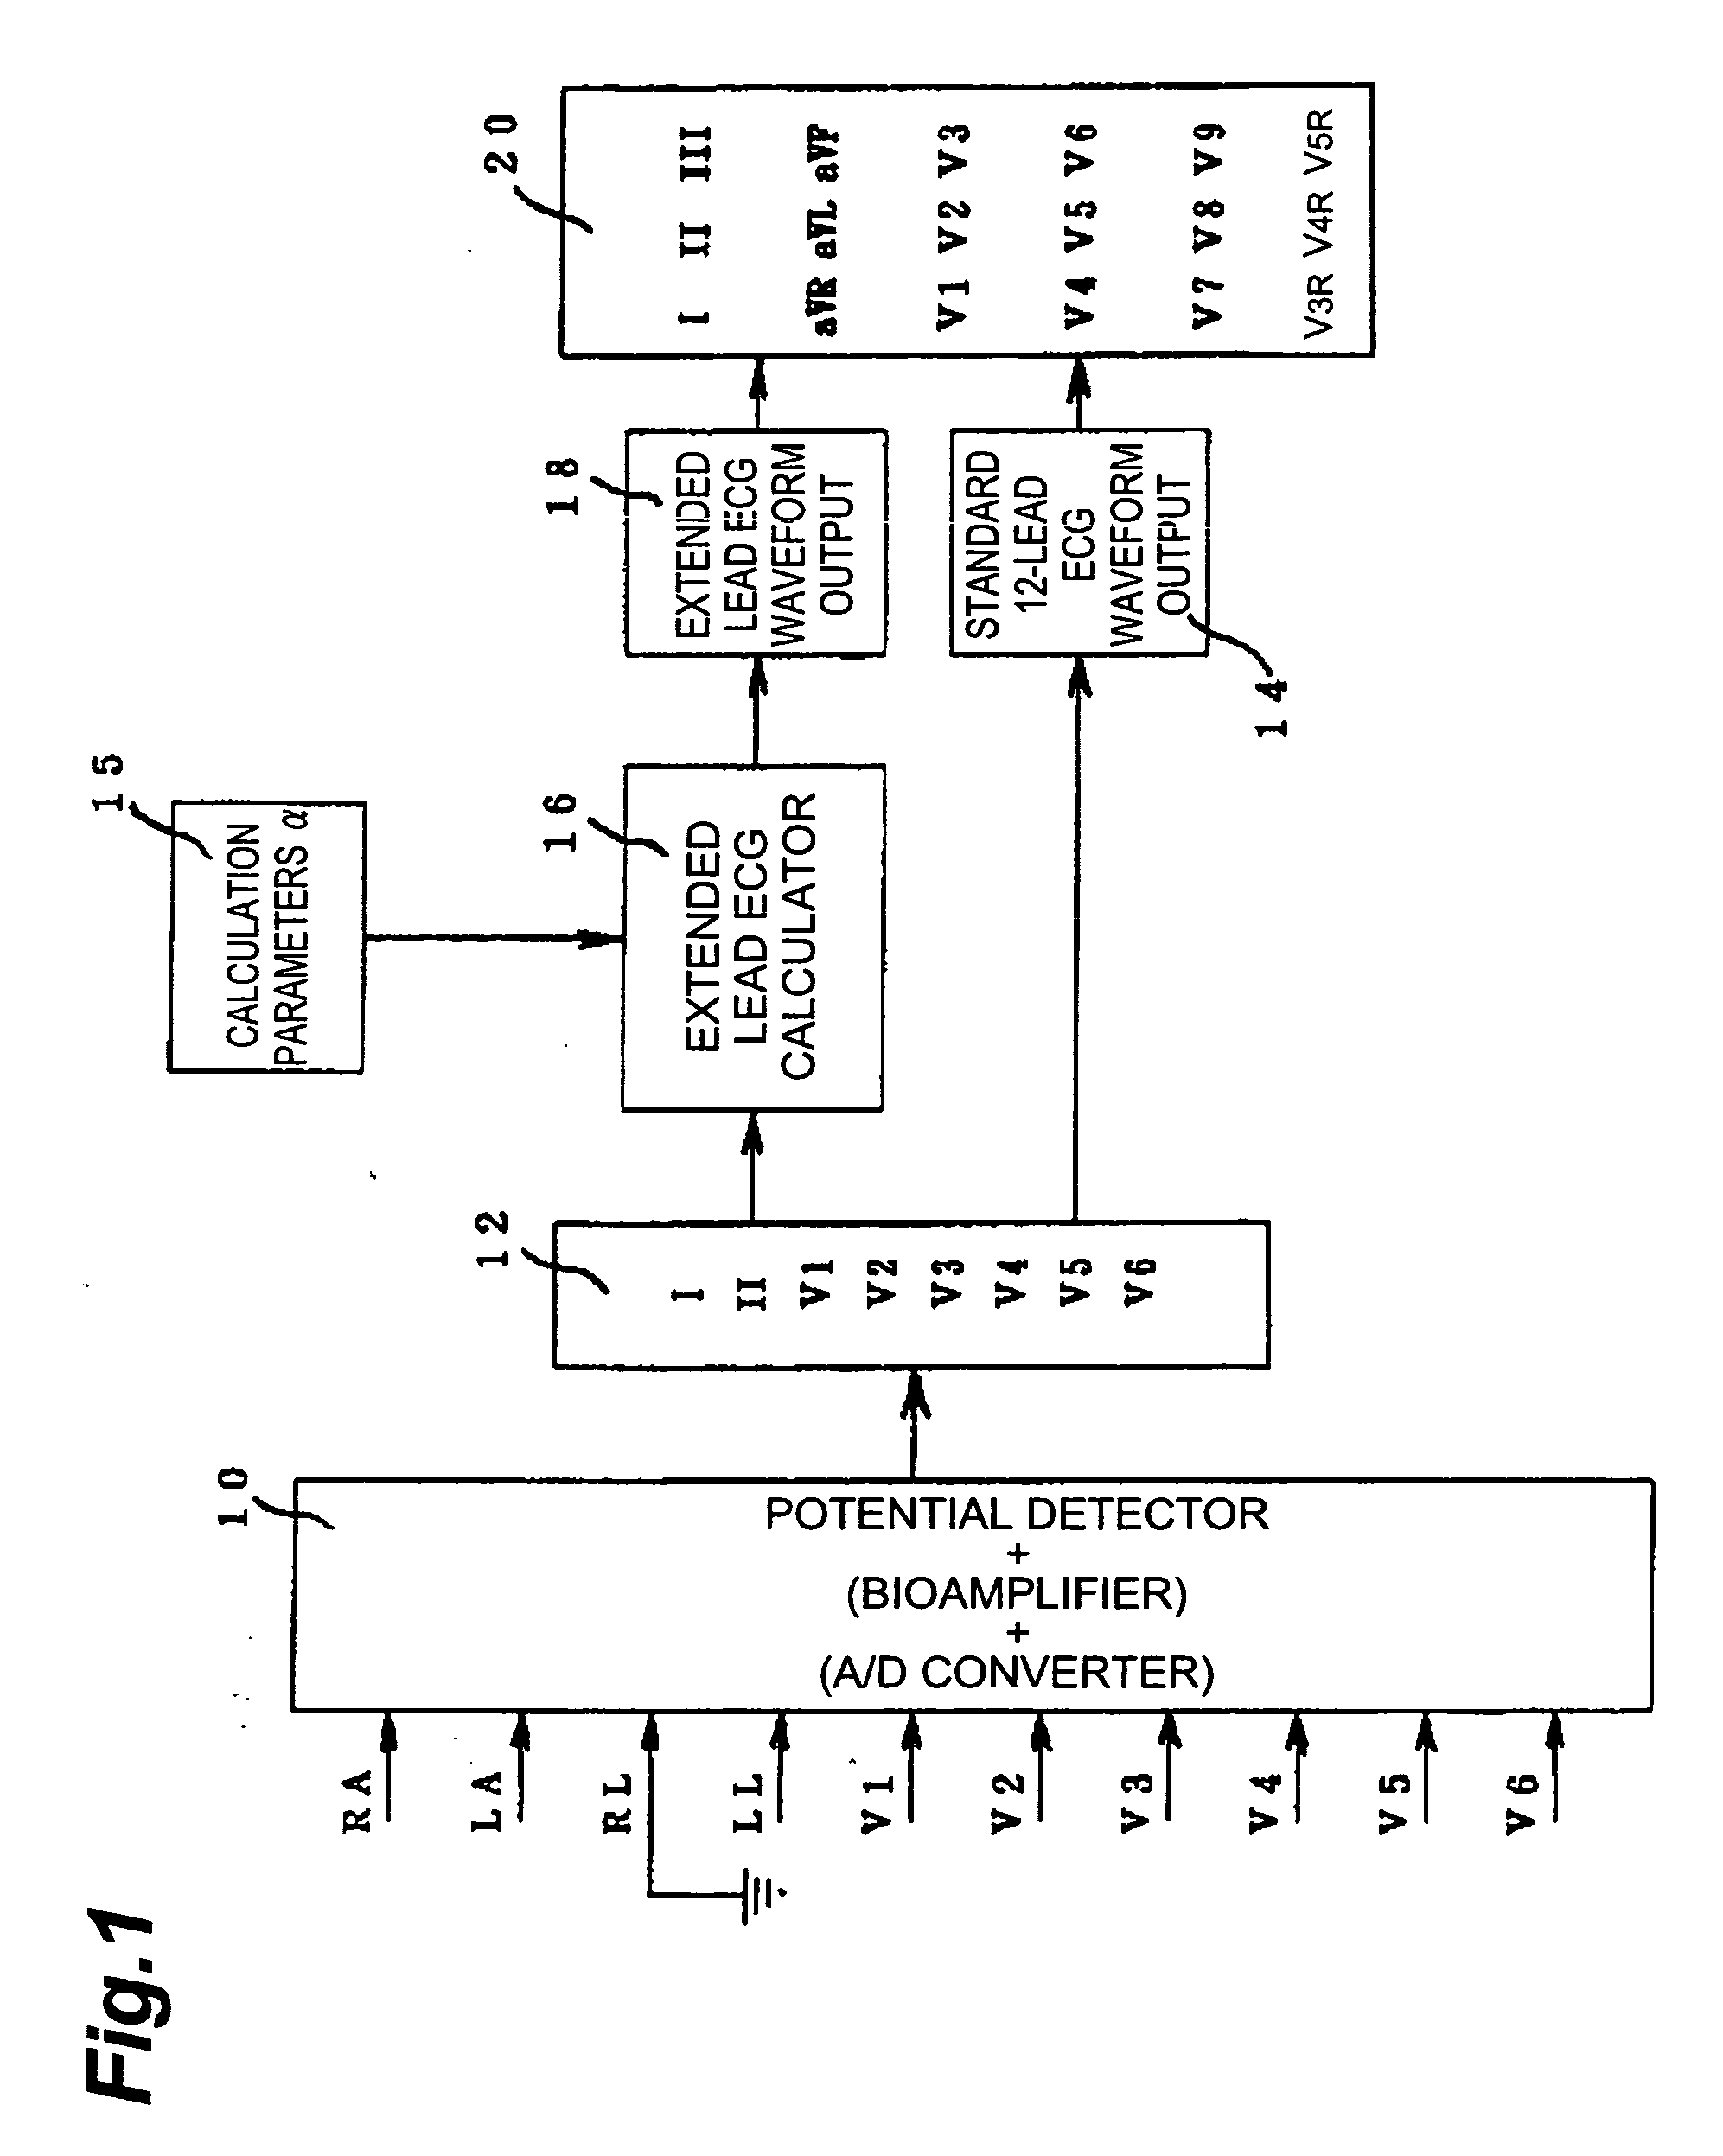 Electrocardiograph device having additional lead function and method for obtaining additional-lead electrocardiogram